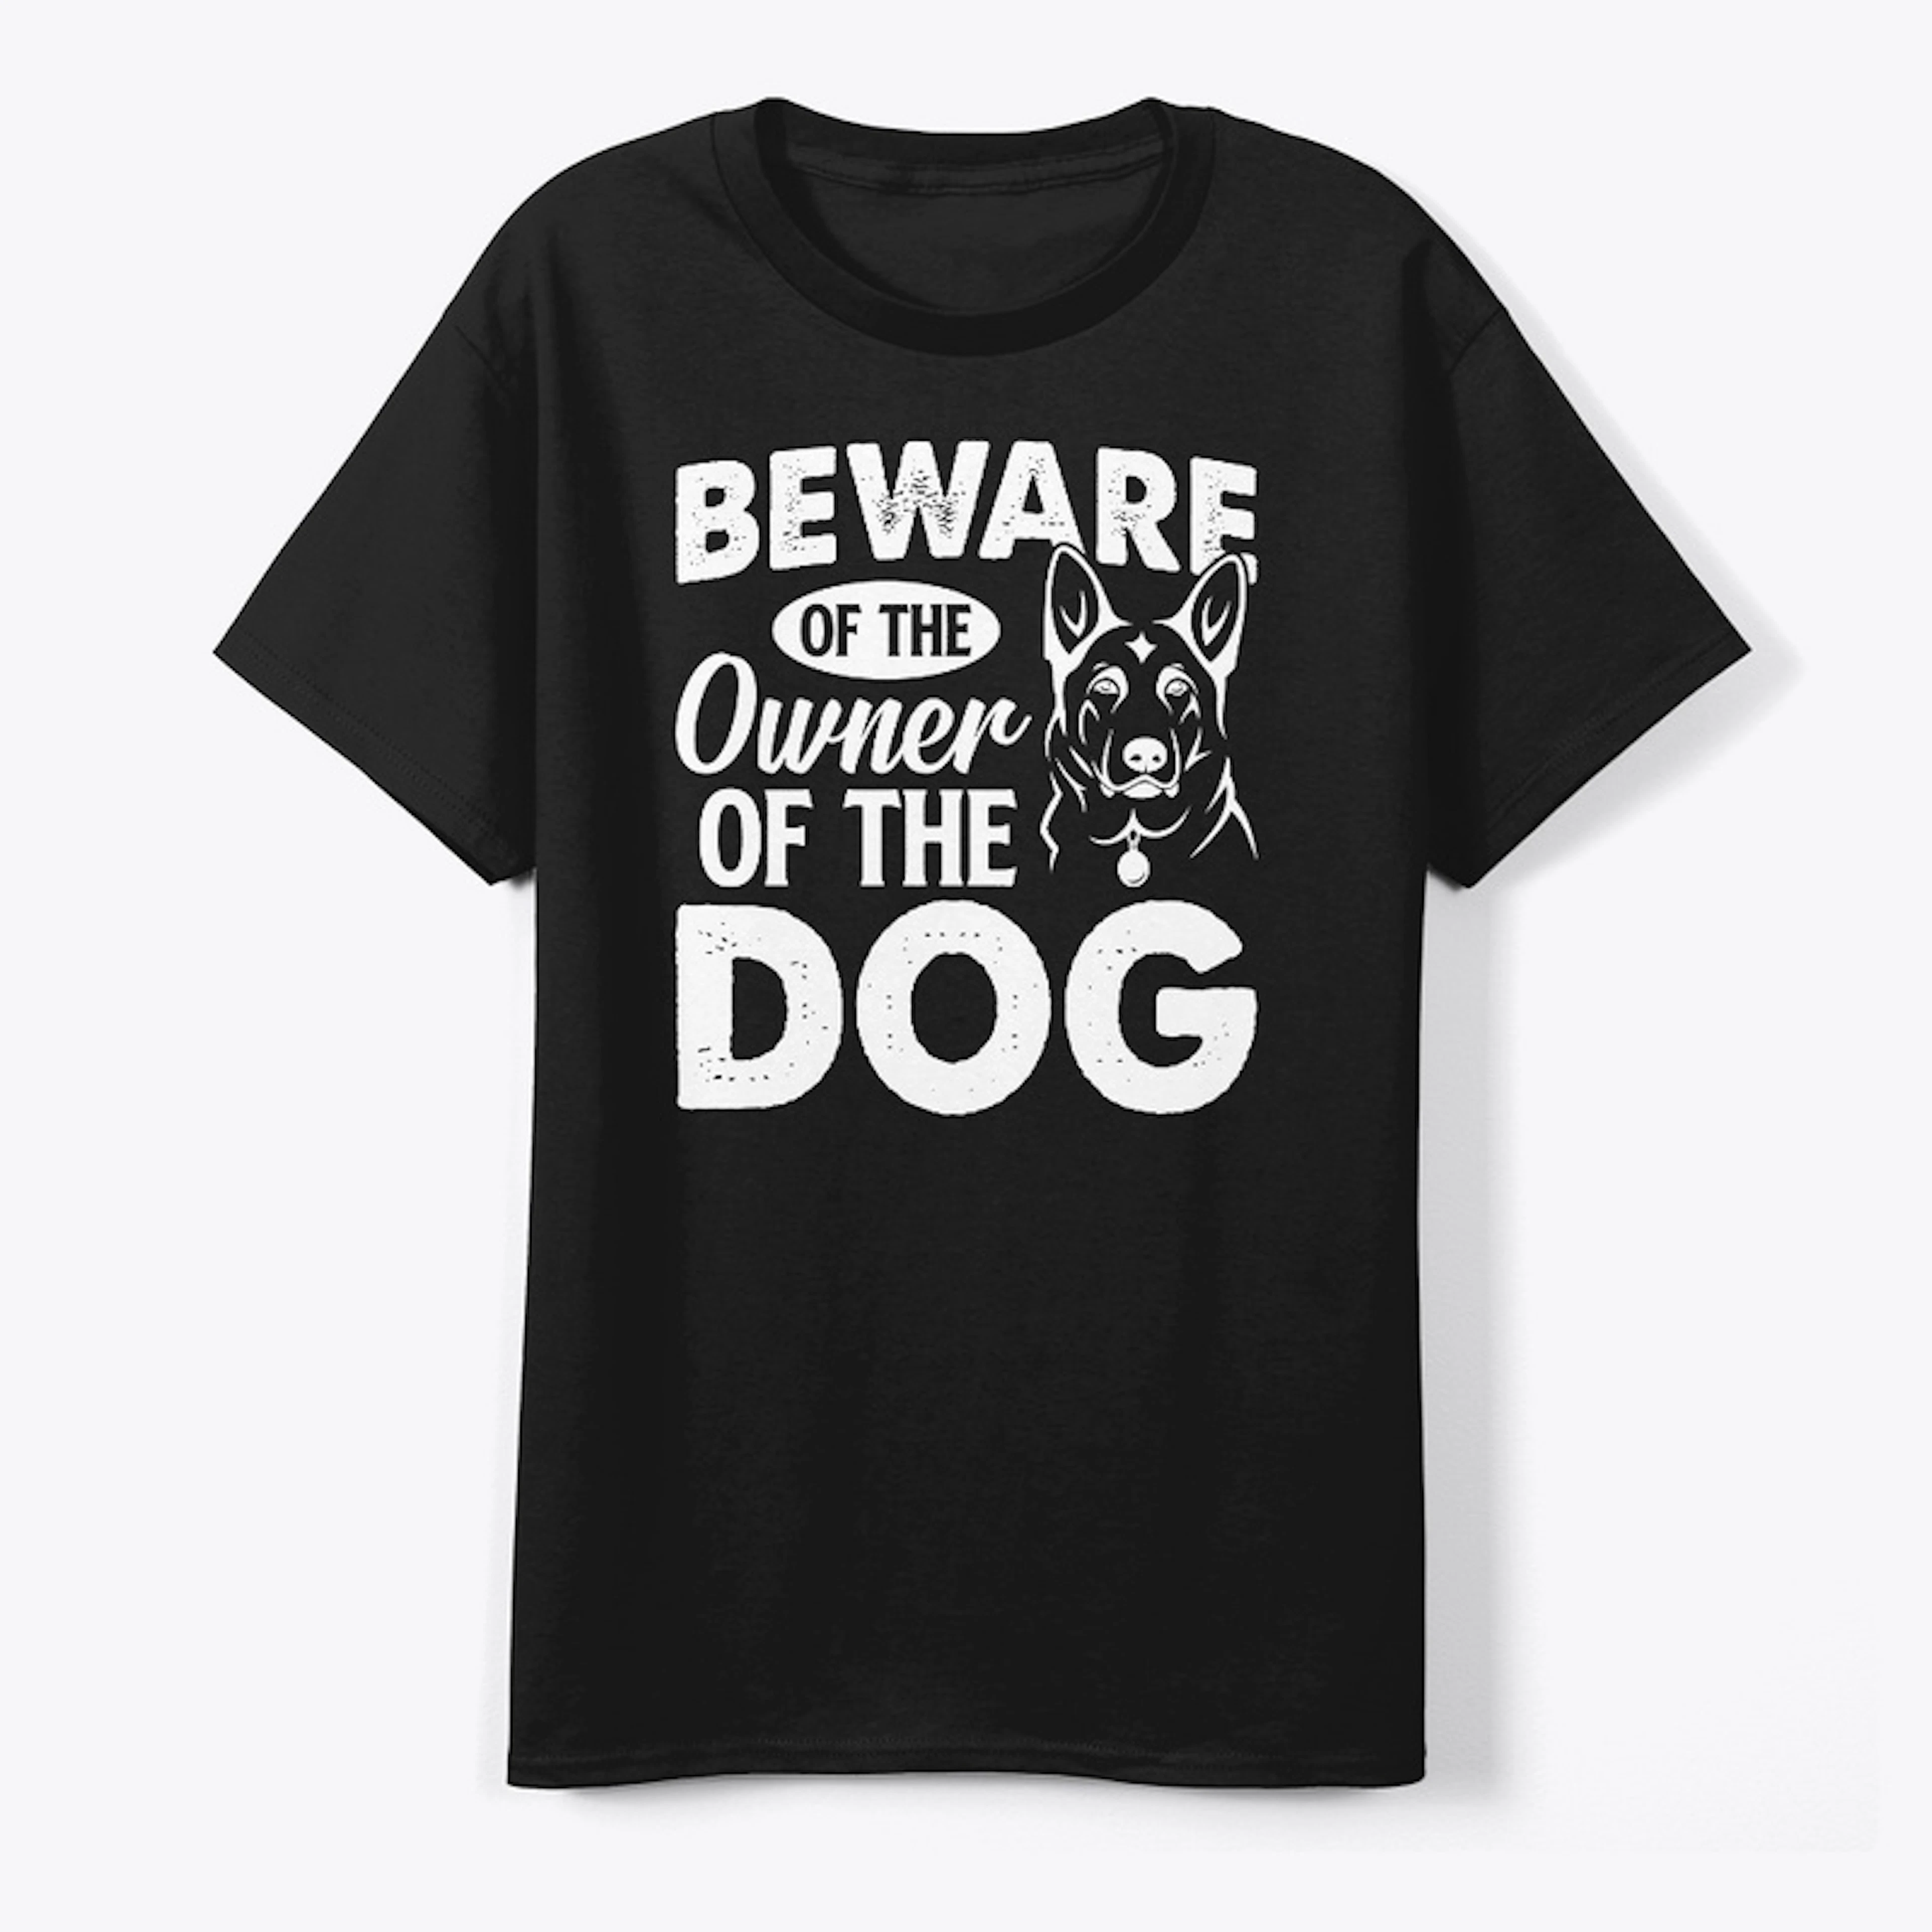 Beware of the owner of the dog